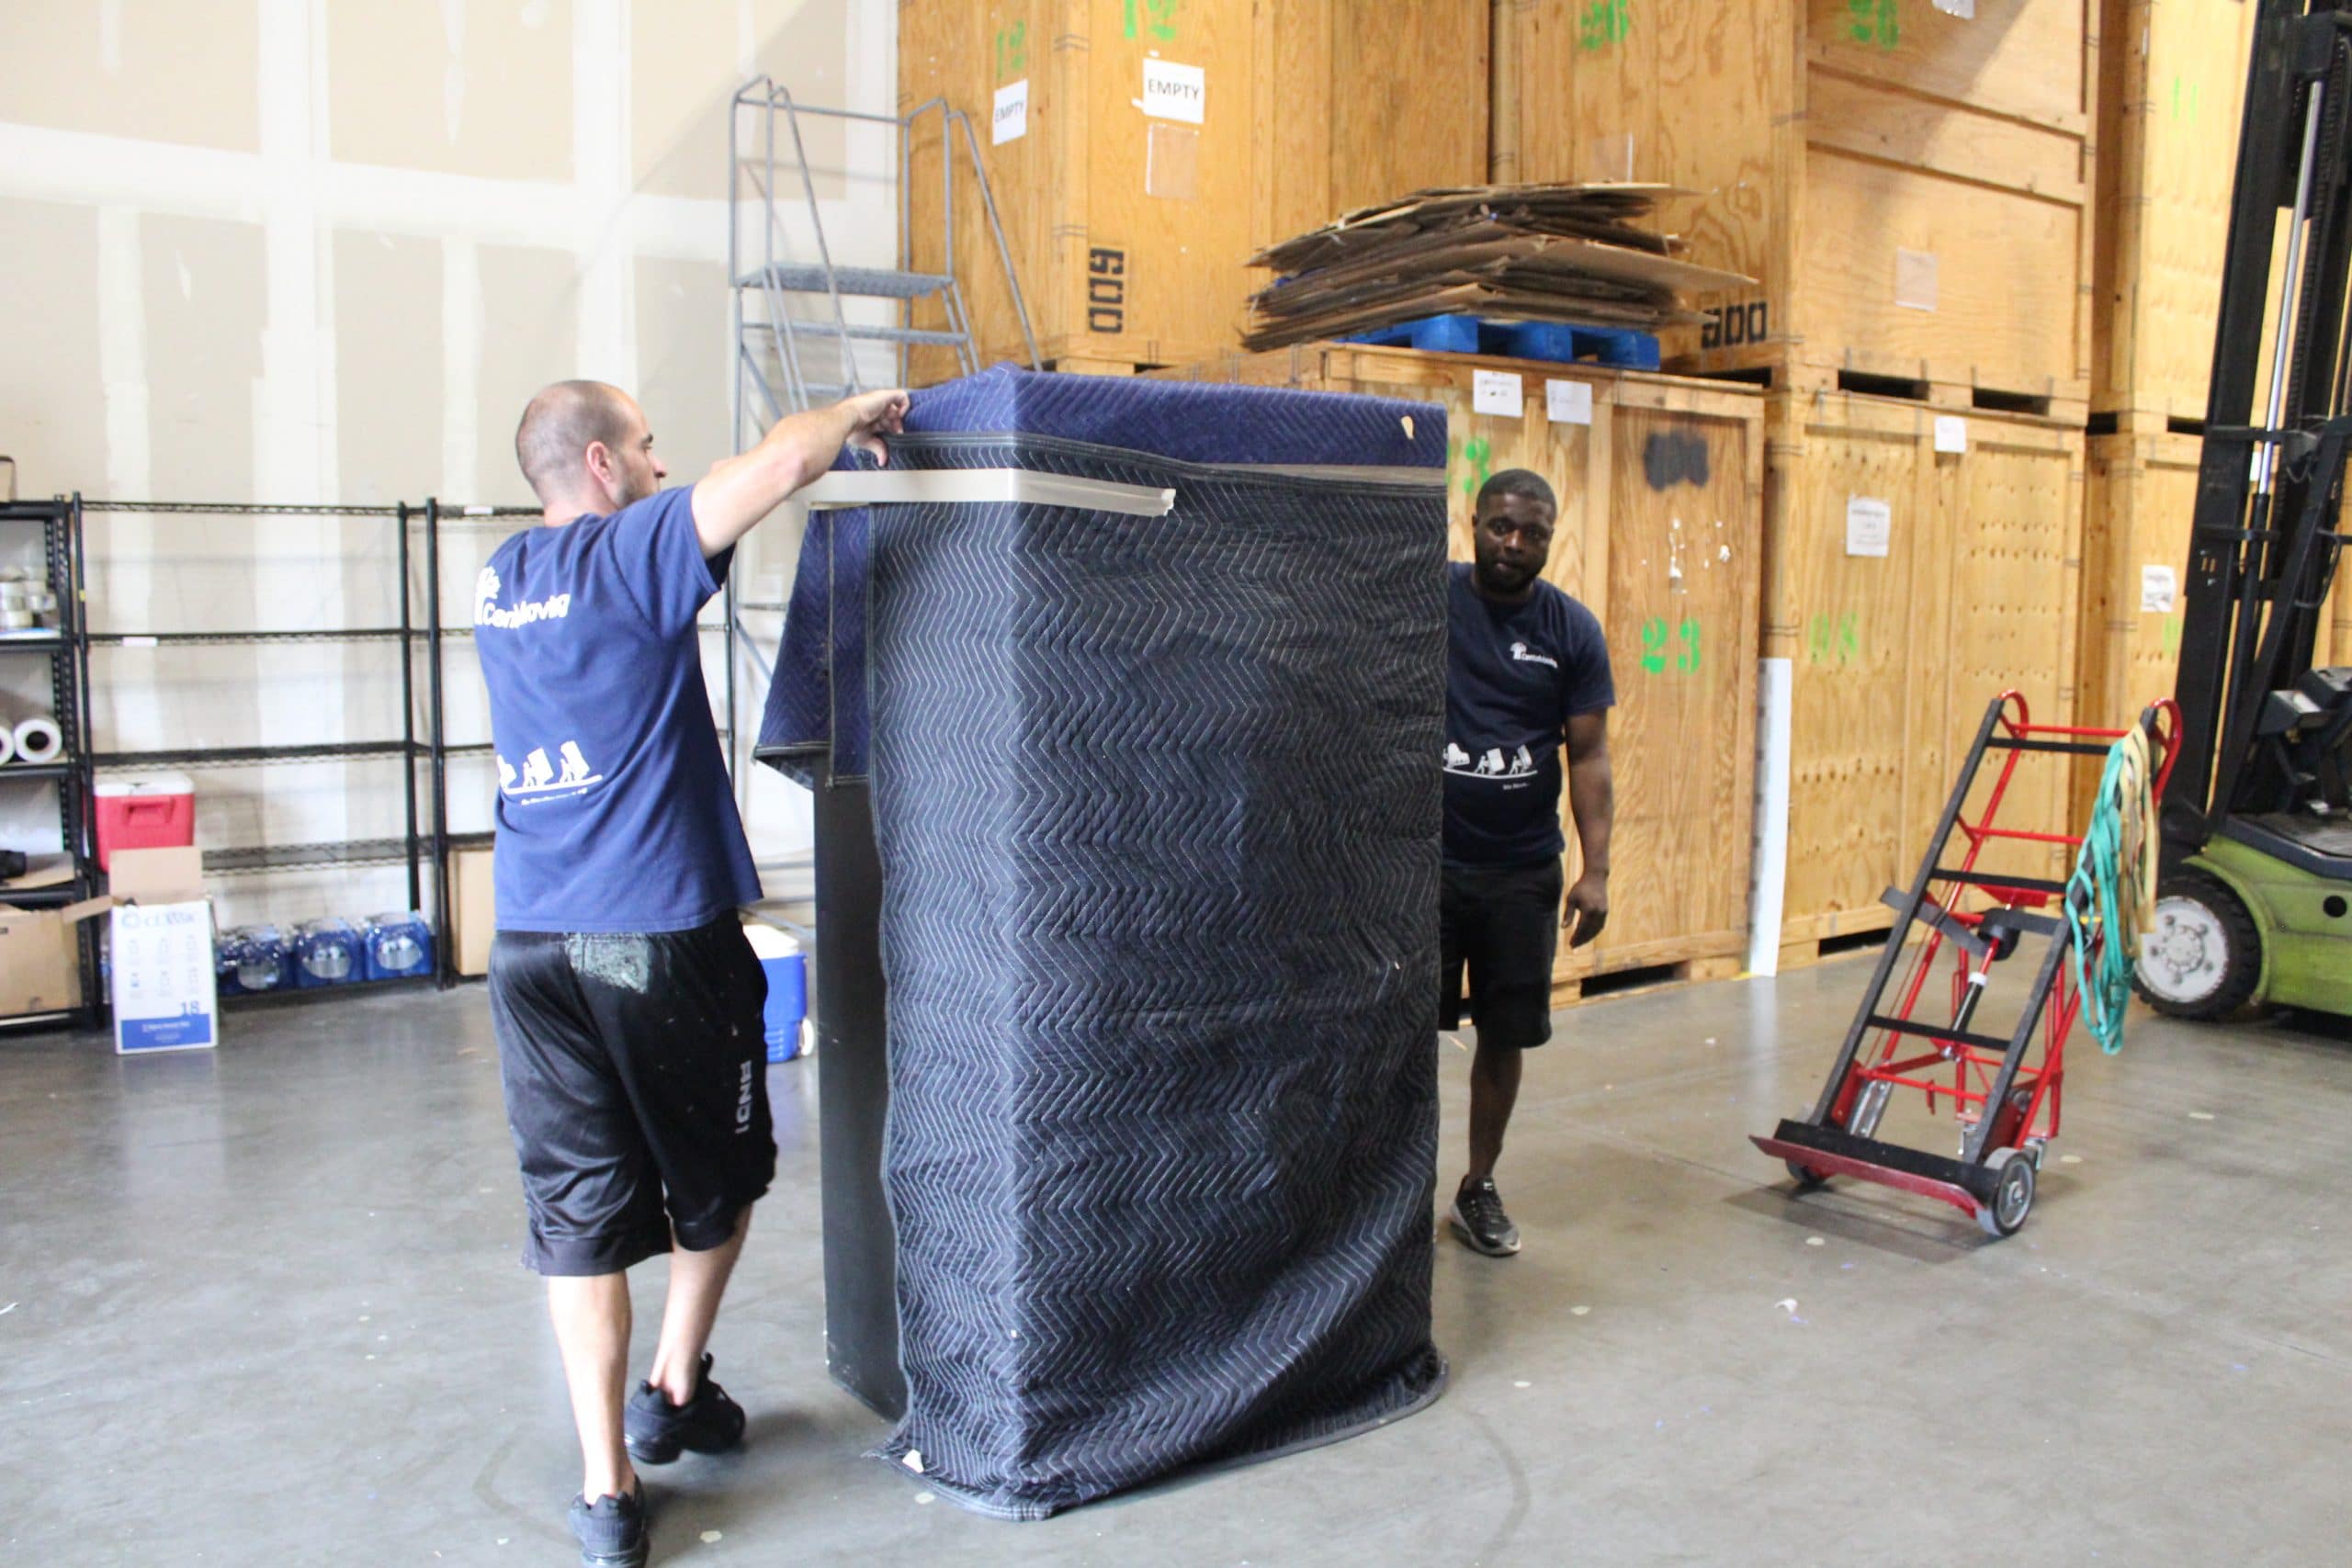 Men in a warehouse moving wrapped furniture